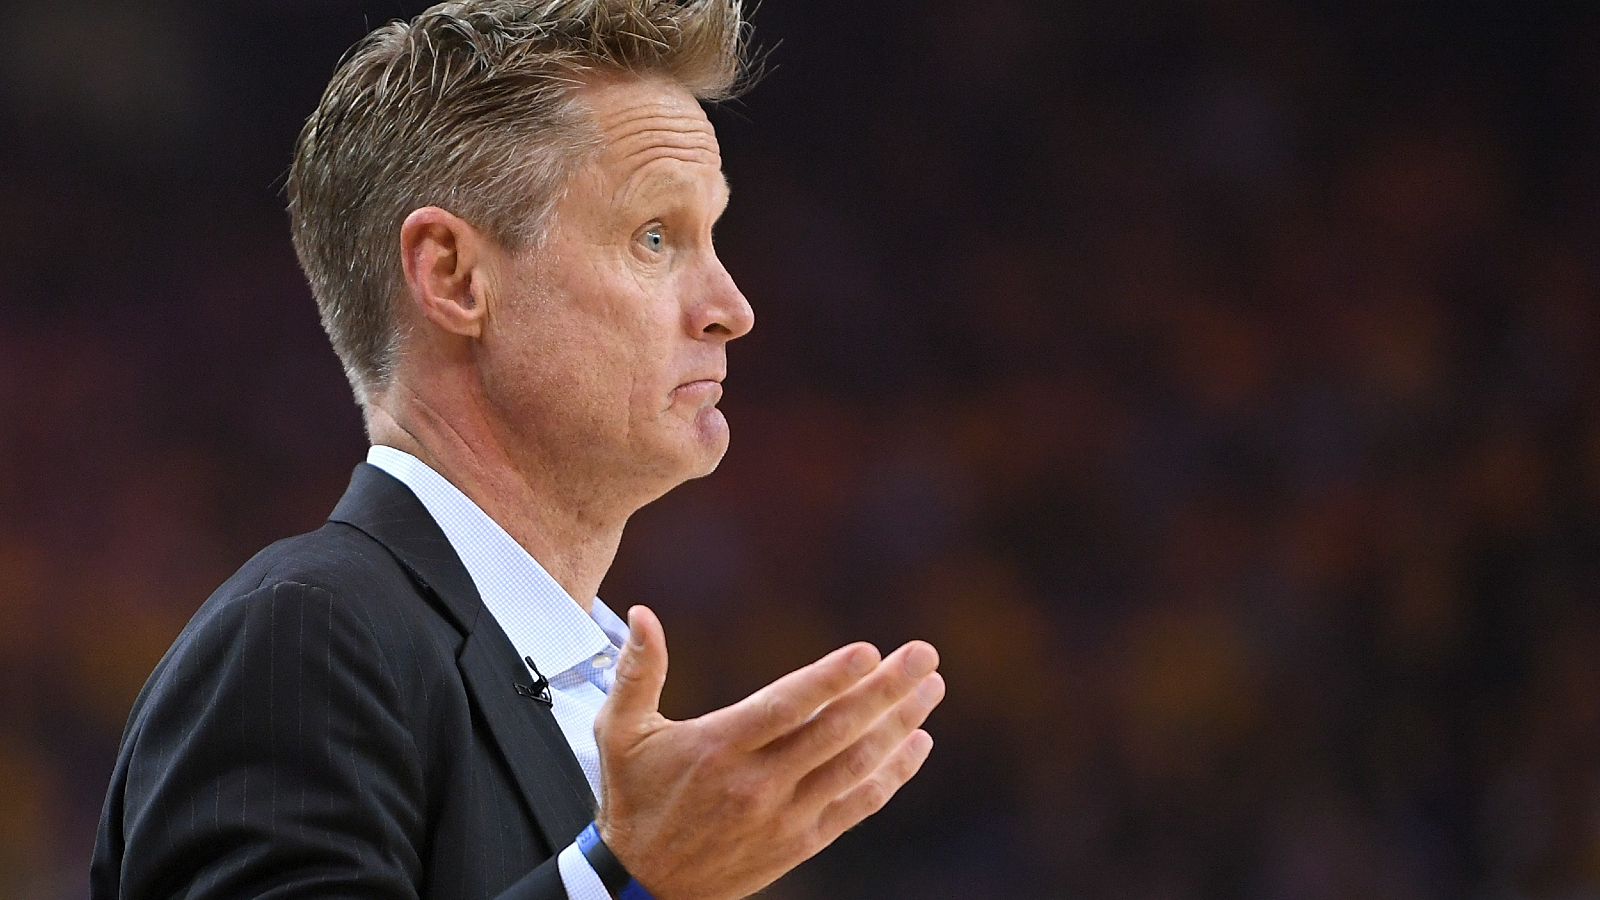 How Many NBA Championship Rings Does Steve Kerr Have?